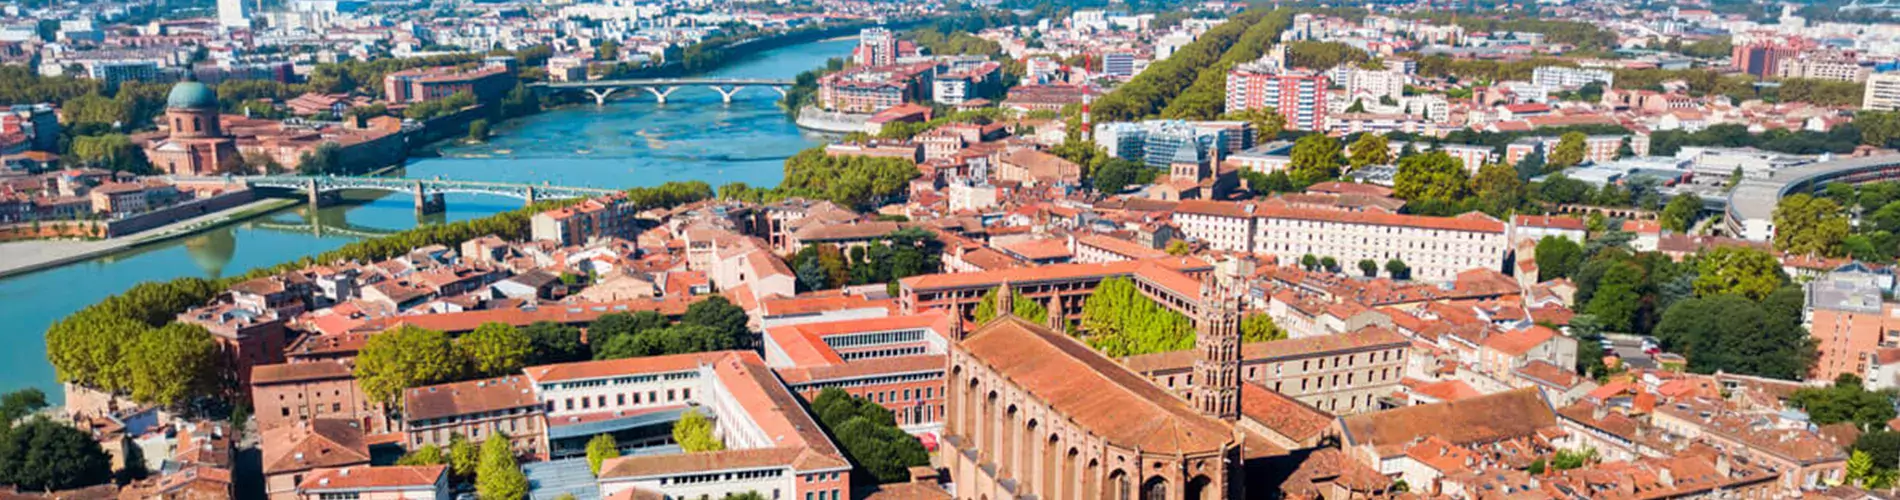 TOULOUSE